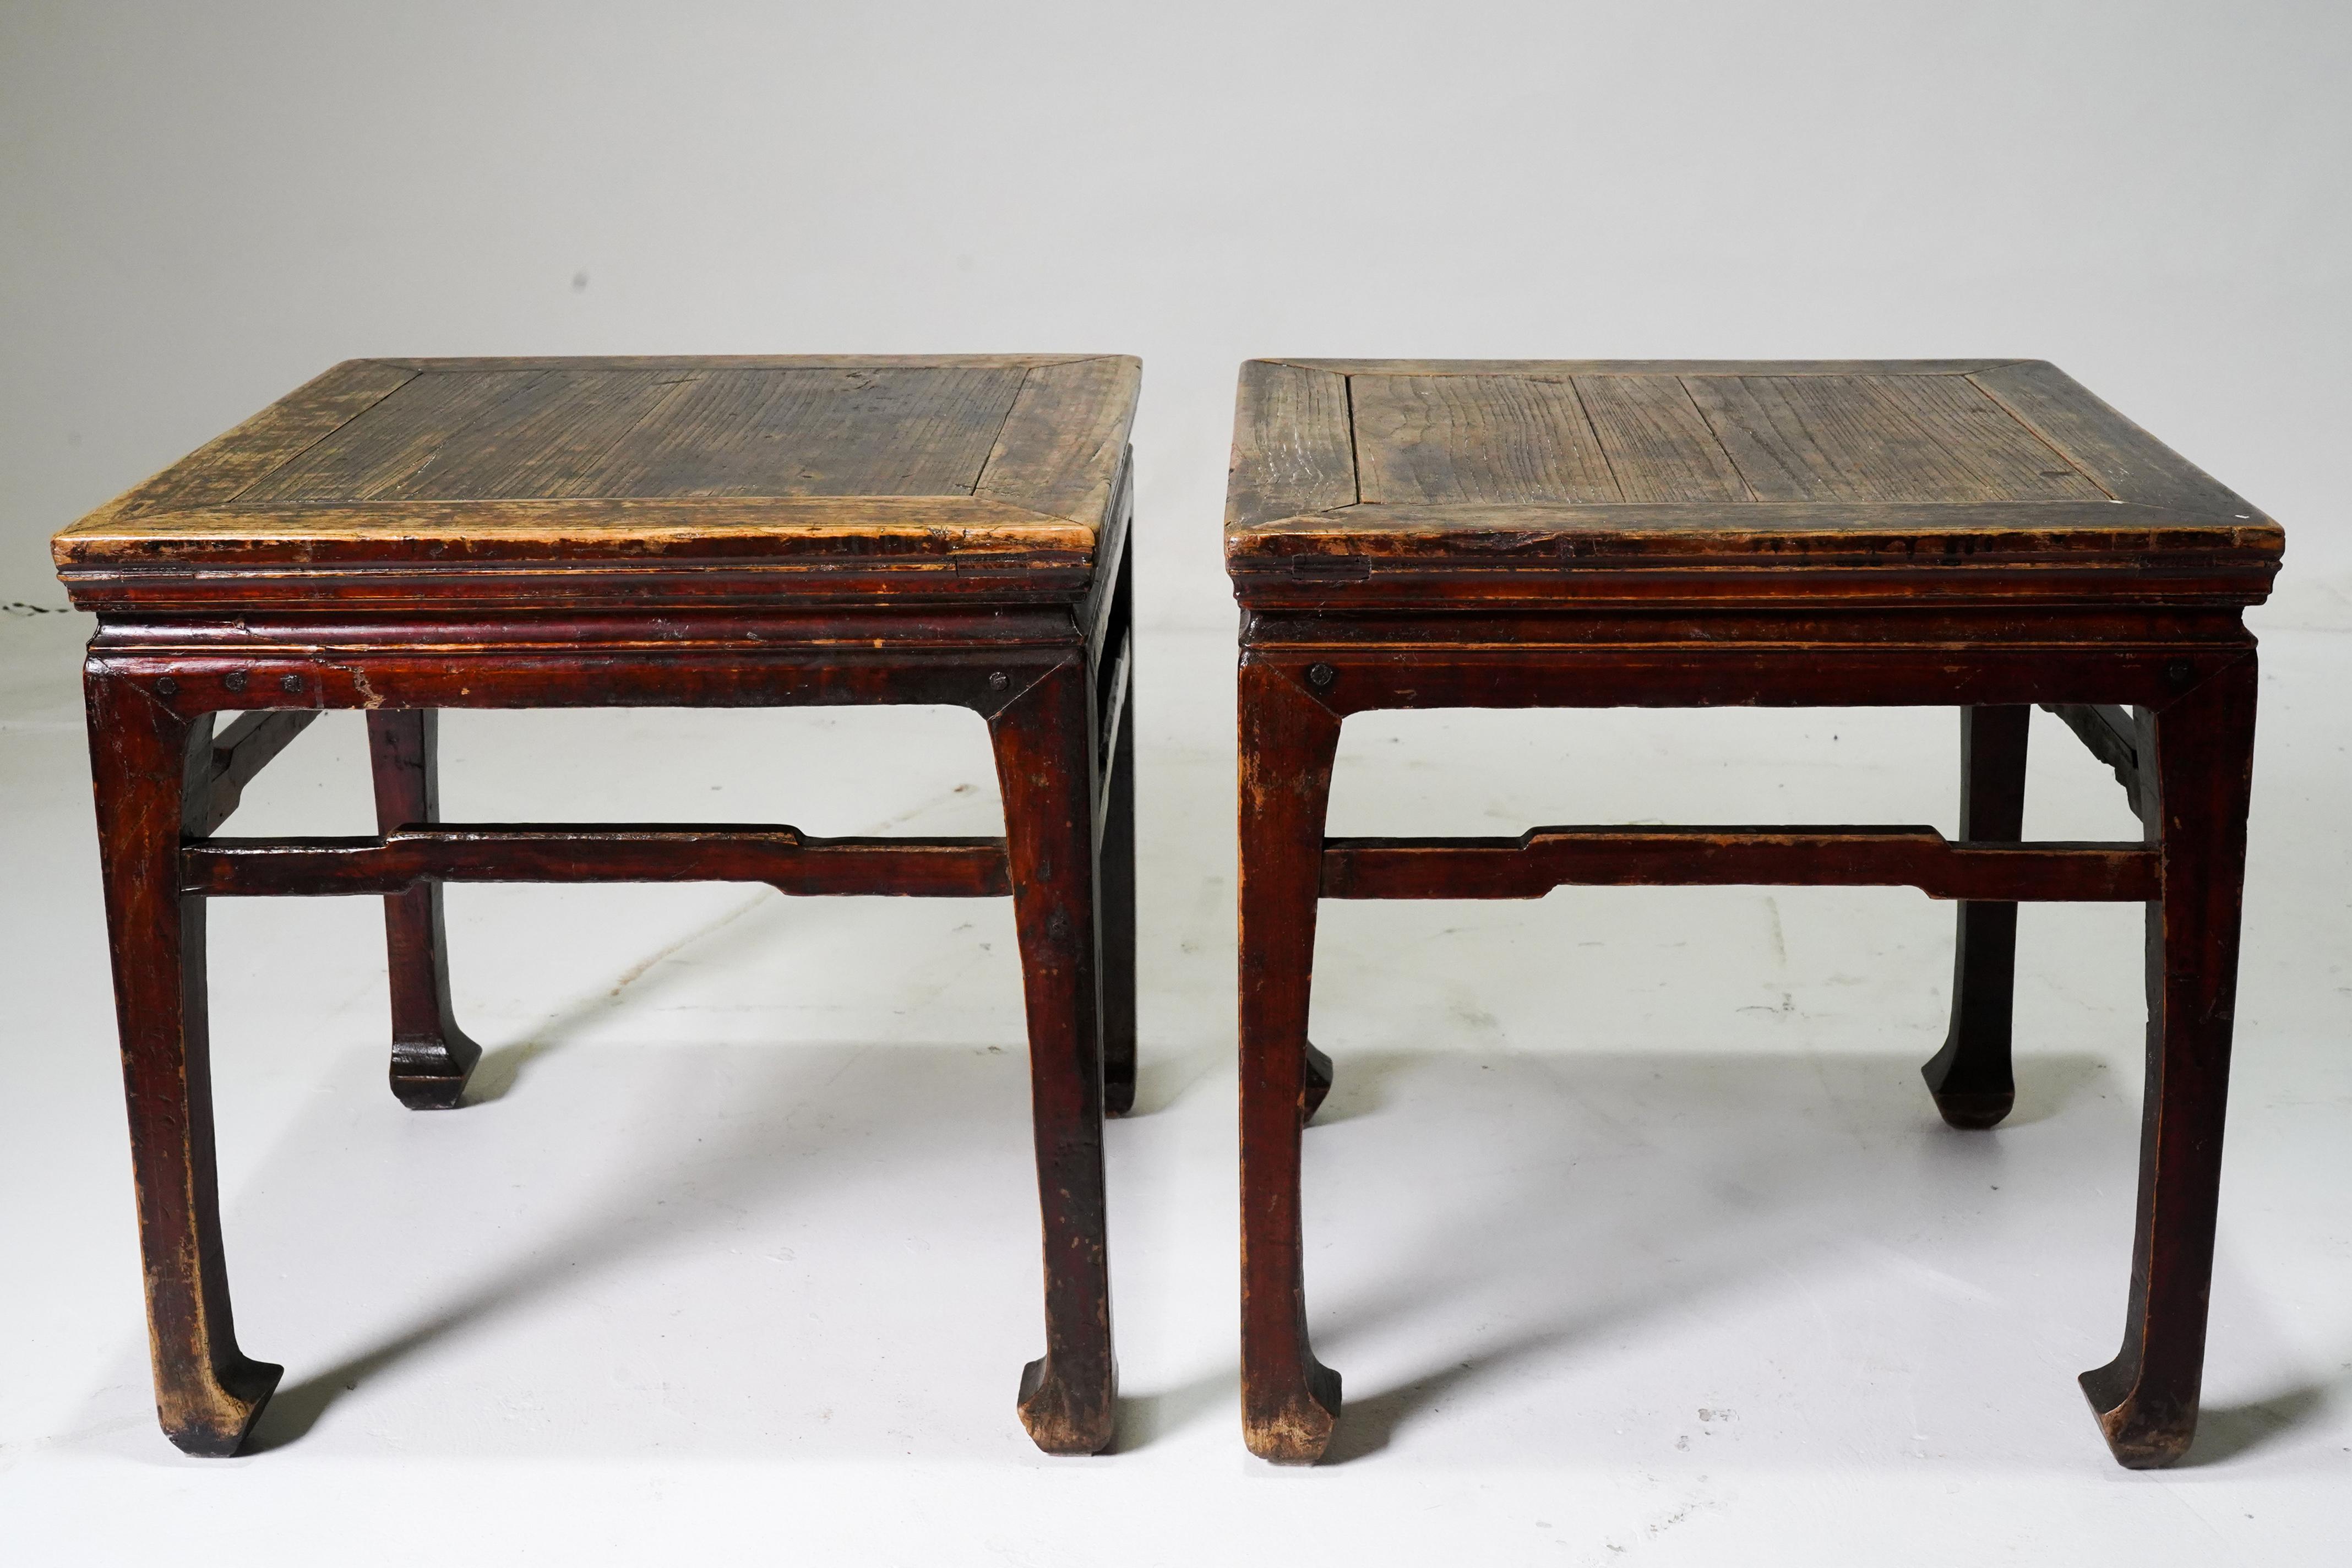 A pair of Chinese Ming Dynasty style stools (or side tables) from the mid-19th century, with humpbacked stretchers, horsehoof feet and waisted aprons. The stools (sometimes called thinking stools) feature a square top with central board, sitting